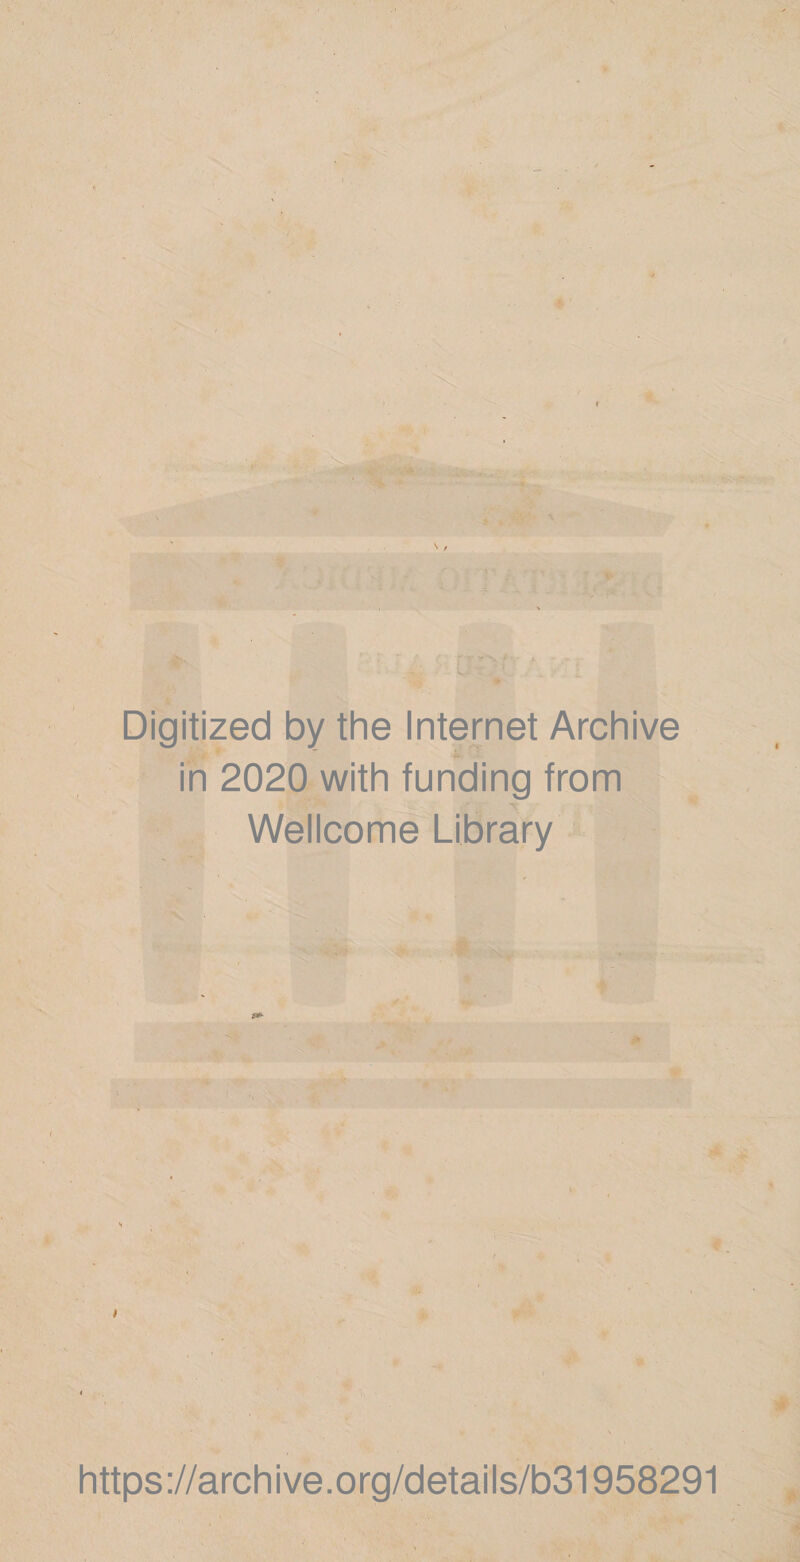 % Digitized by the Internet Archive in 2020 with funding from Wellcome Library https://archive.org/details/b31958291